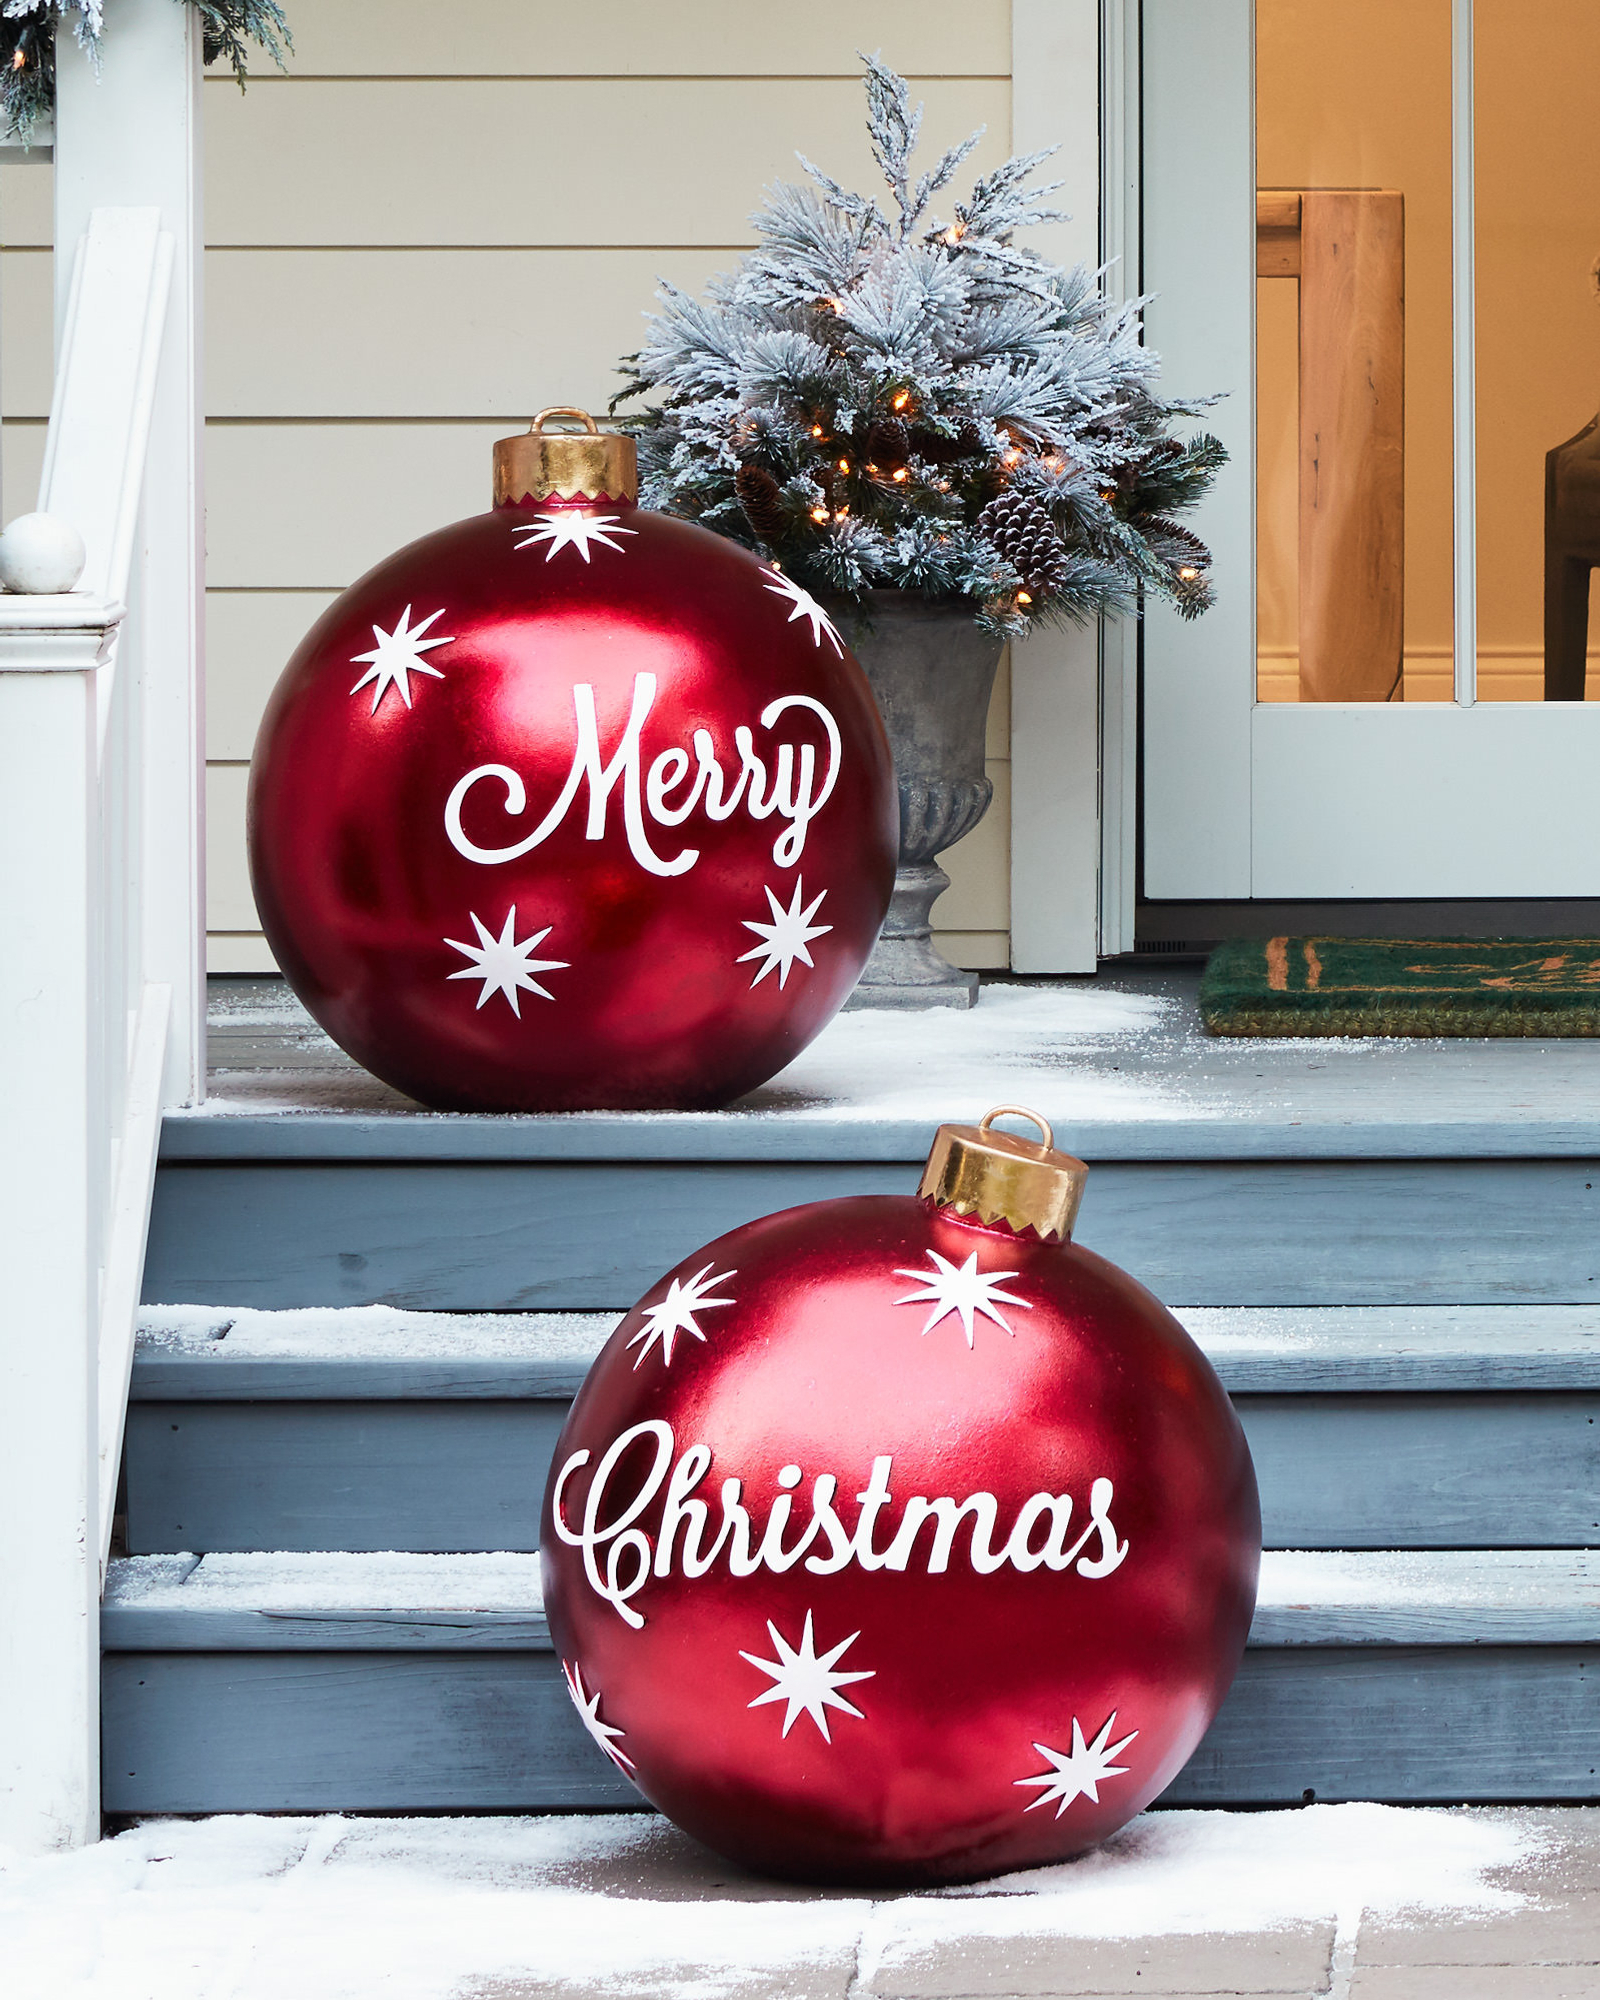 https://source.widen.net/content/po3umnhjcc/jpeg/OUT-1641000_Outdoor-Merry-Christmas-Ornaments-Set-of-2_Lifestyle-15.jpeg?w=1600&h=2000&keep=c&crop=yes&color=cccccc&quality=100&u=7mzq6p